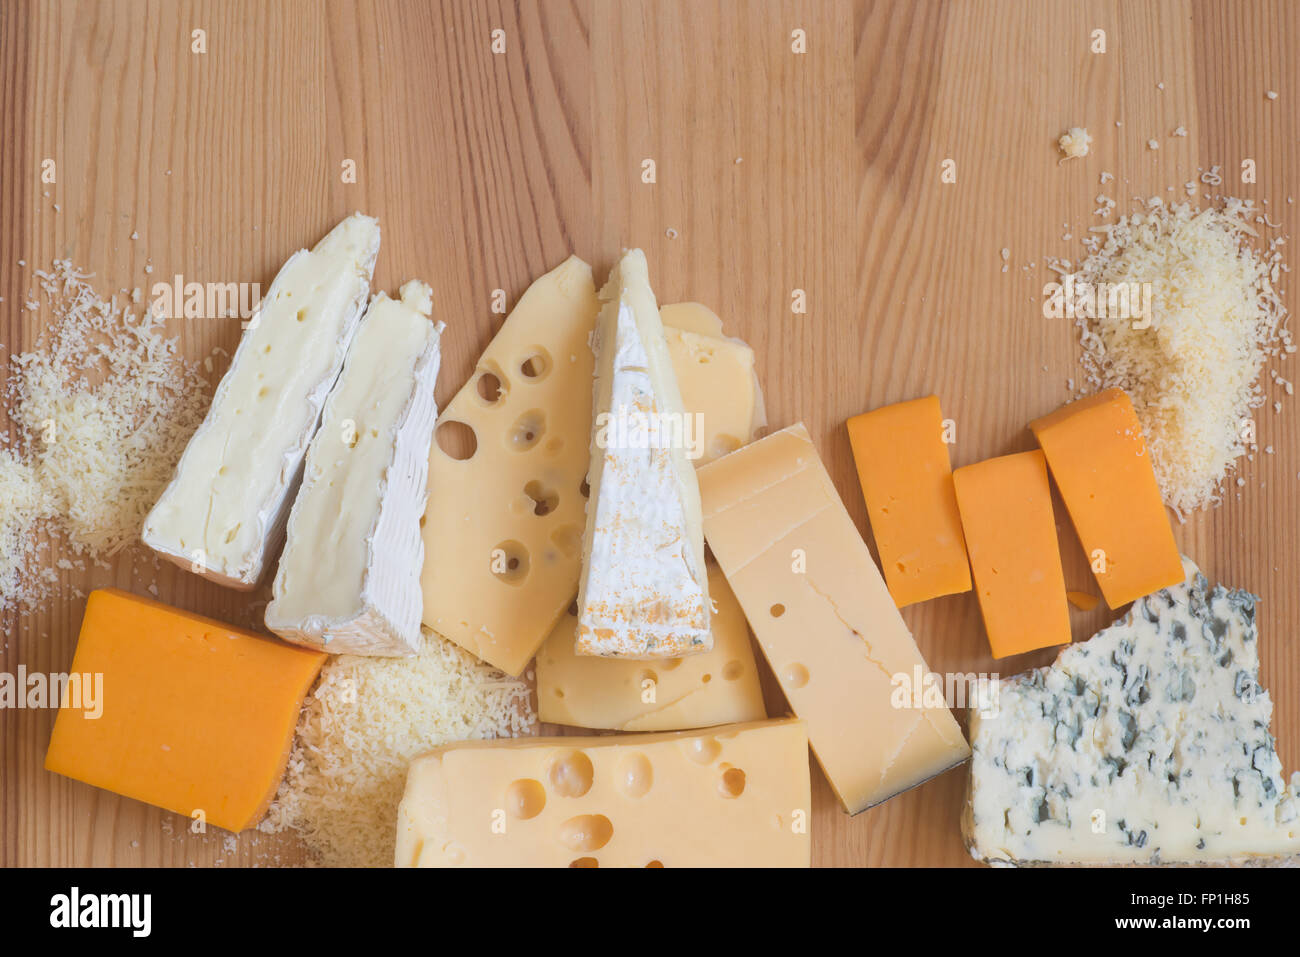 different types of cheese on wooden table Stock Photo